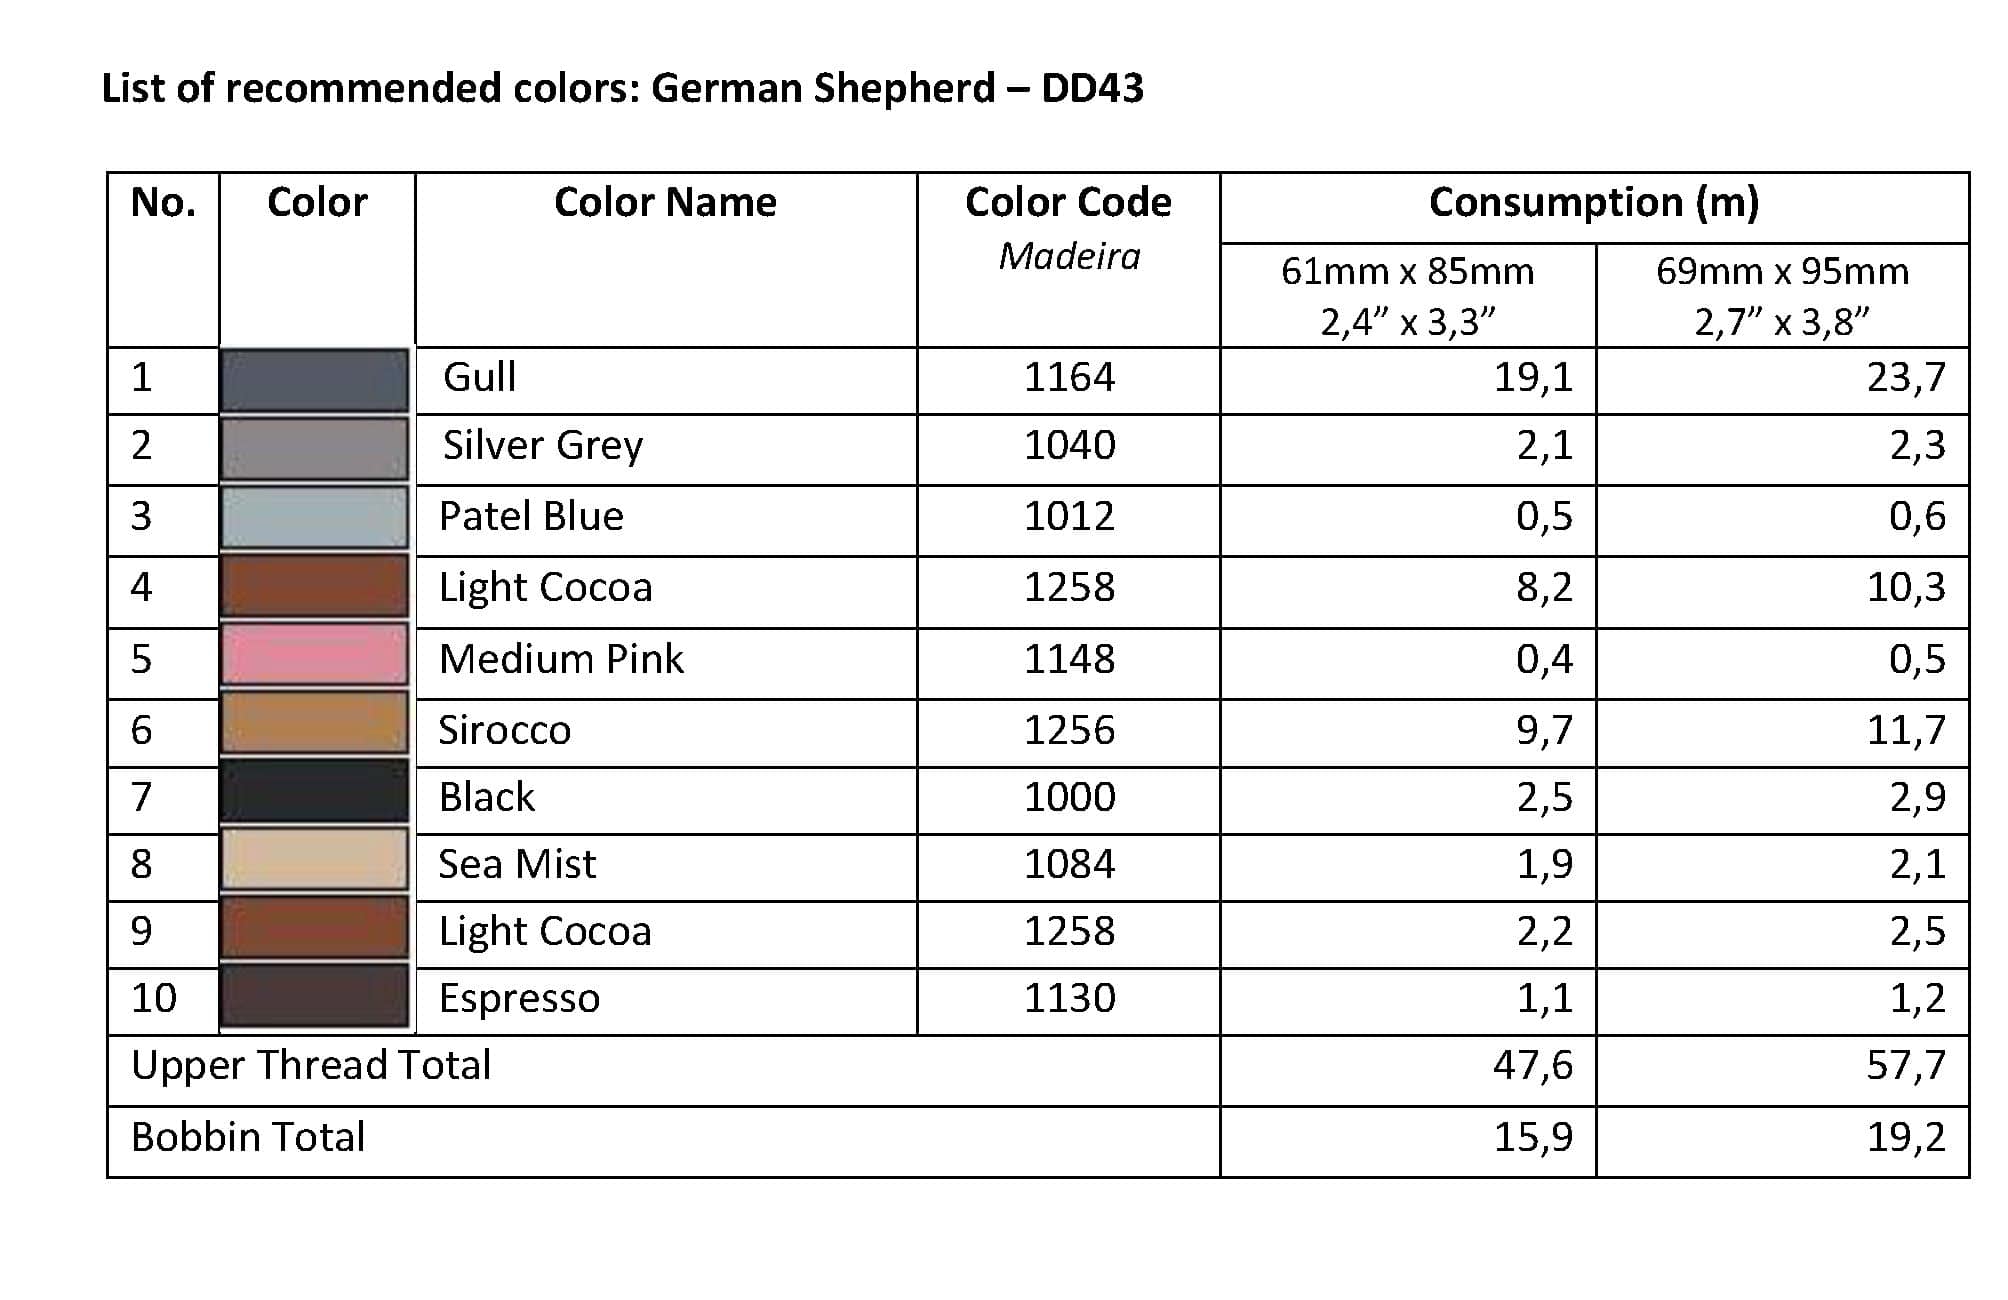 List of Recommended Colors - German Shepherd DD43